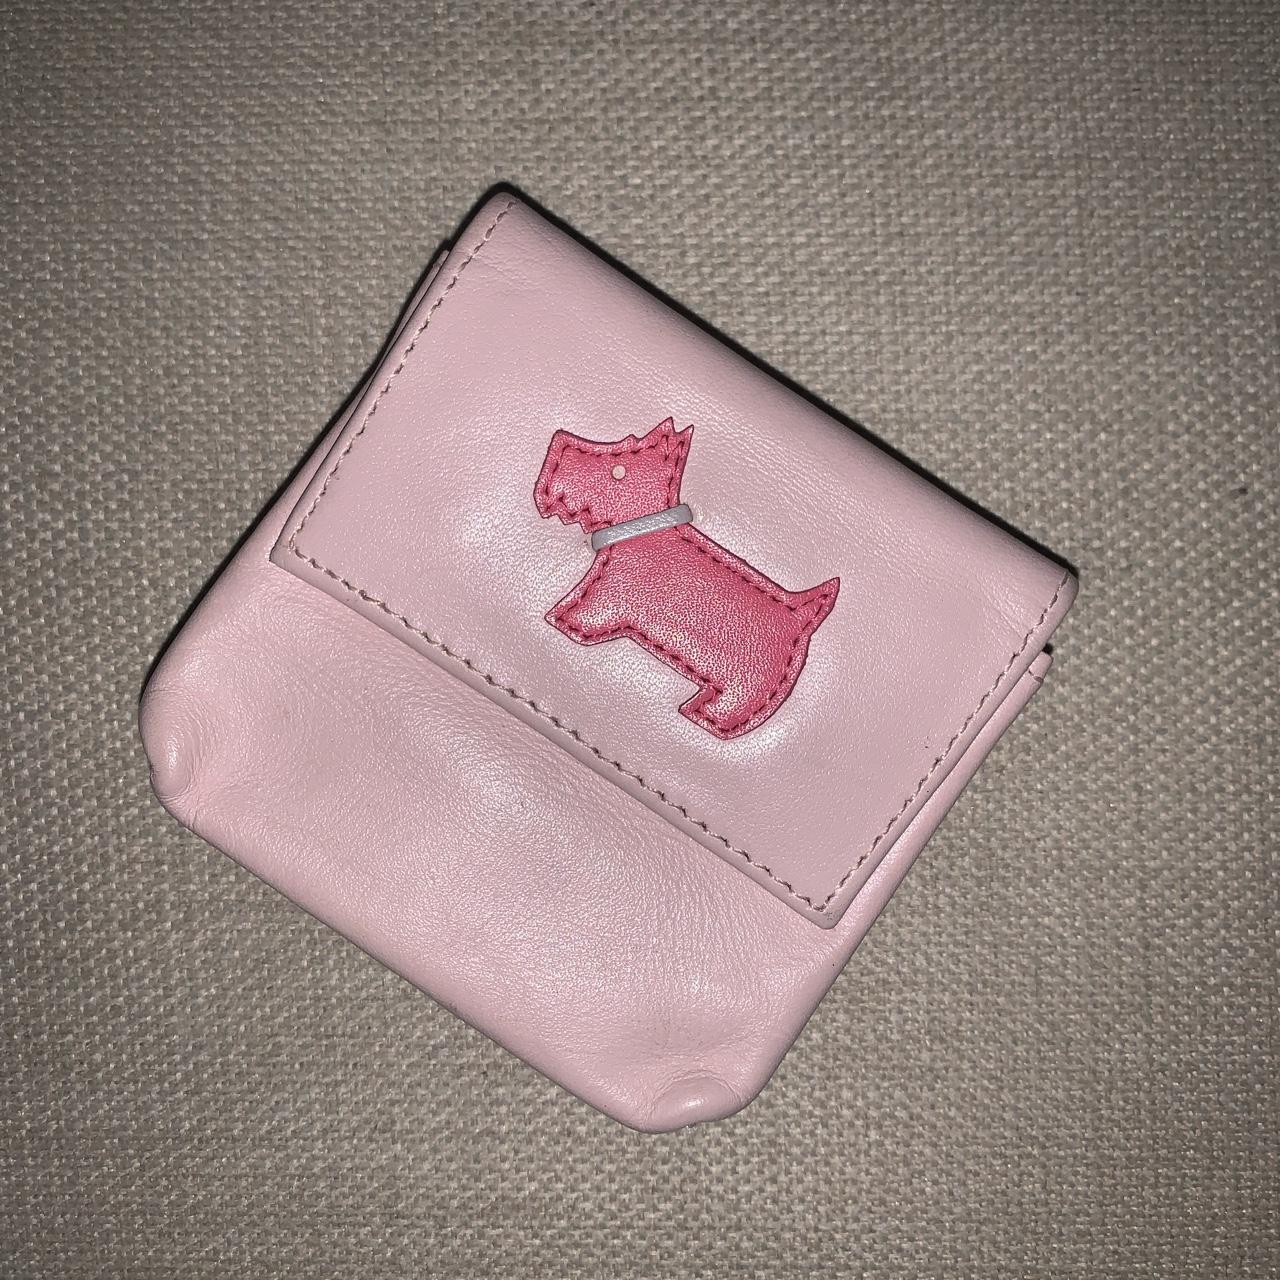 Radley Dog Shaped Bag And small coin purse never... - Depop